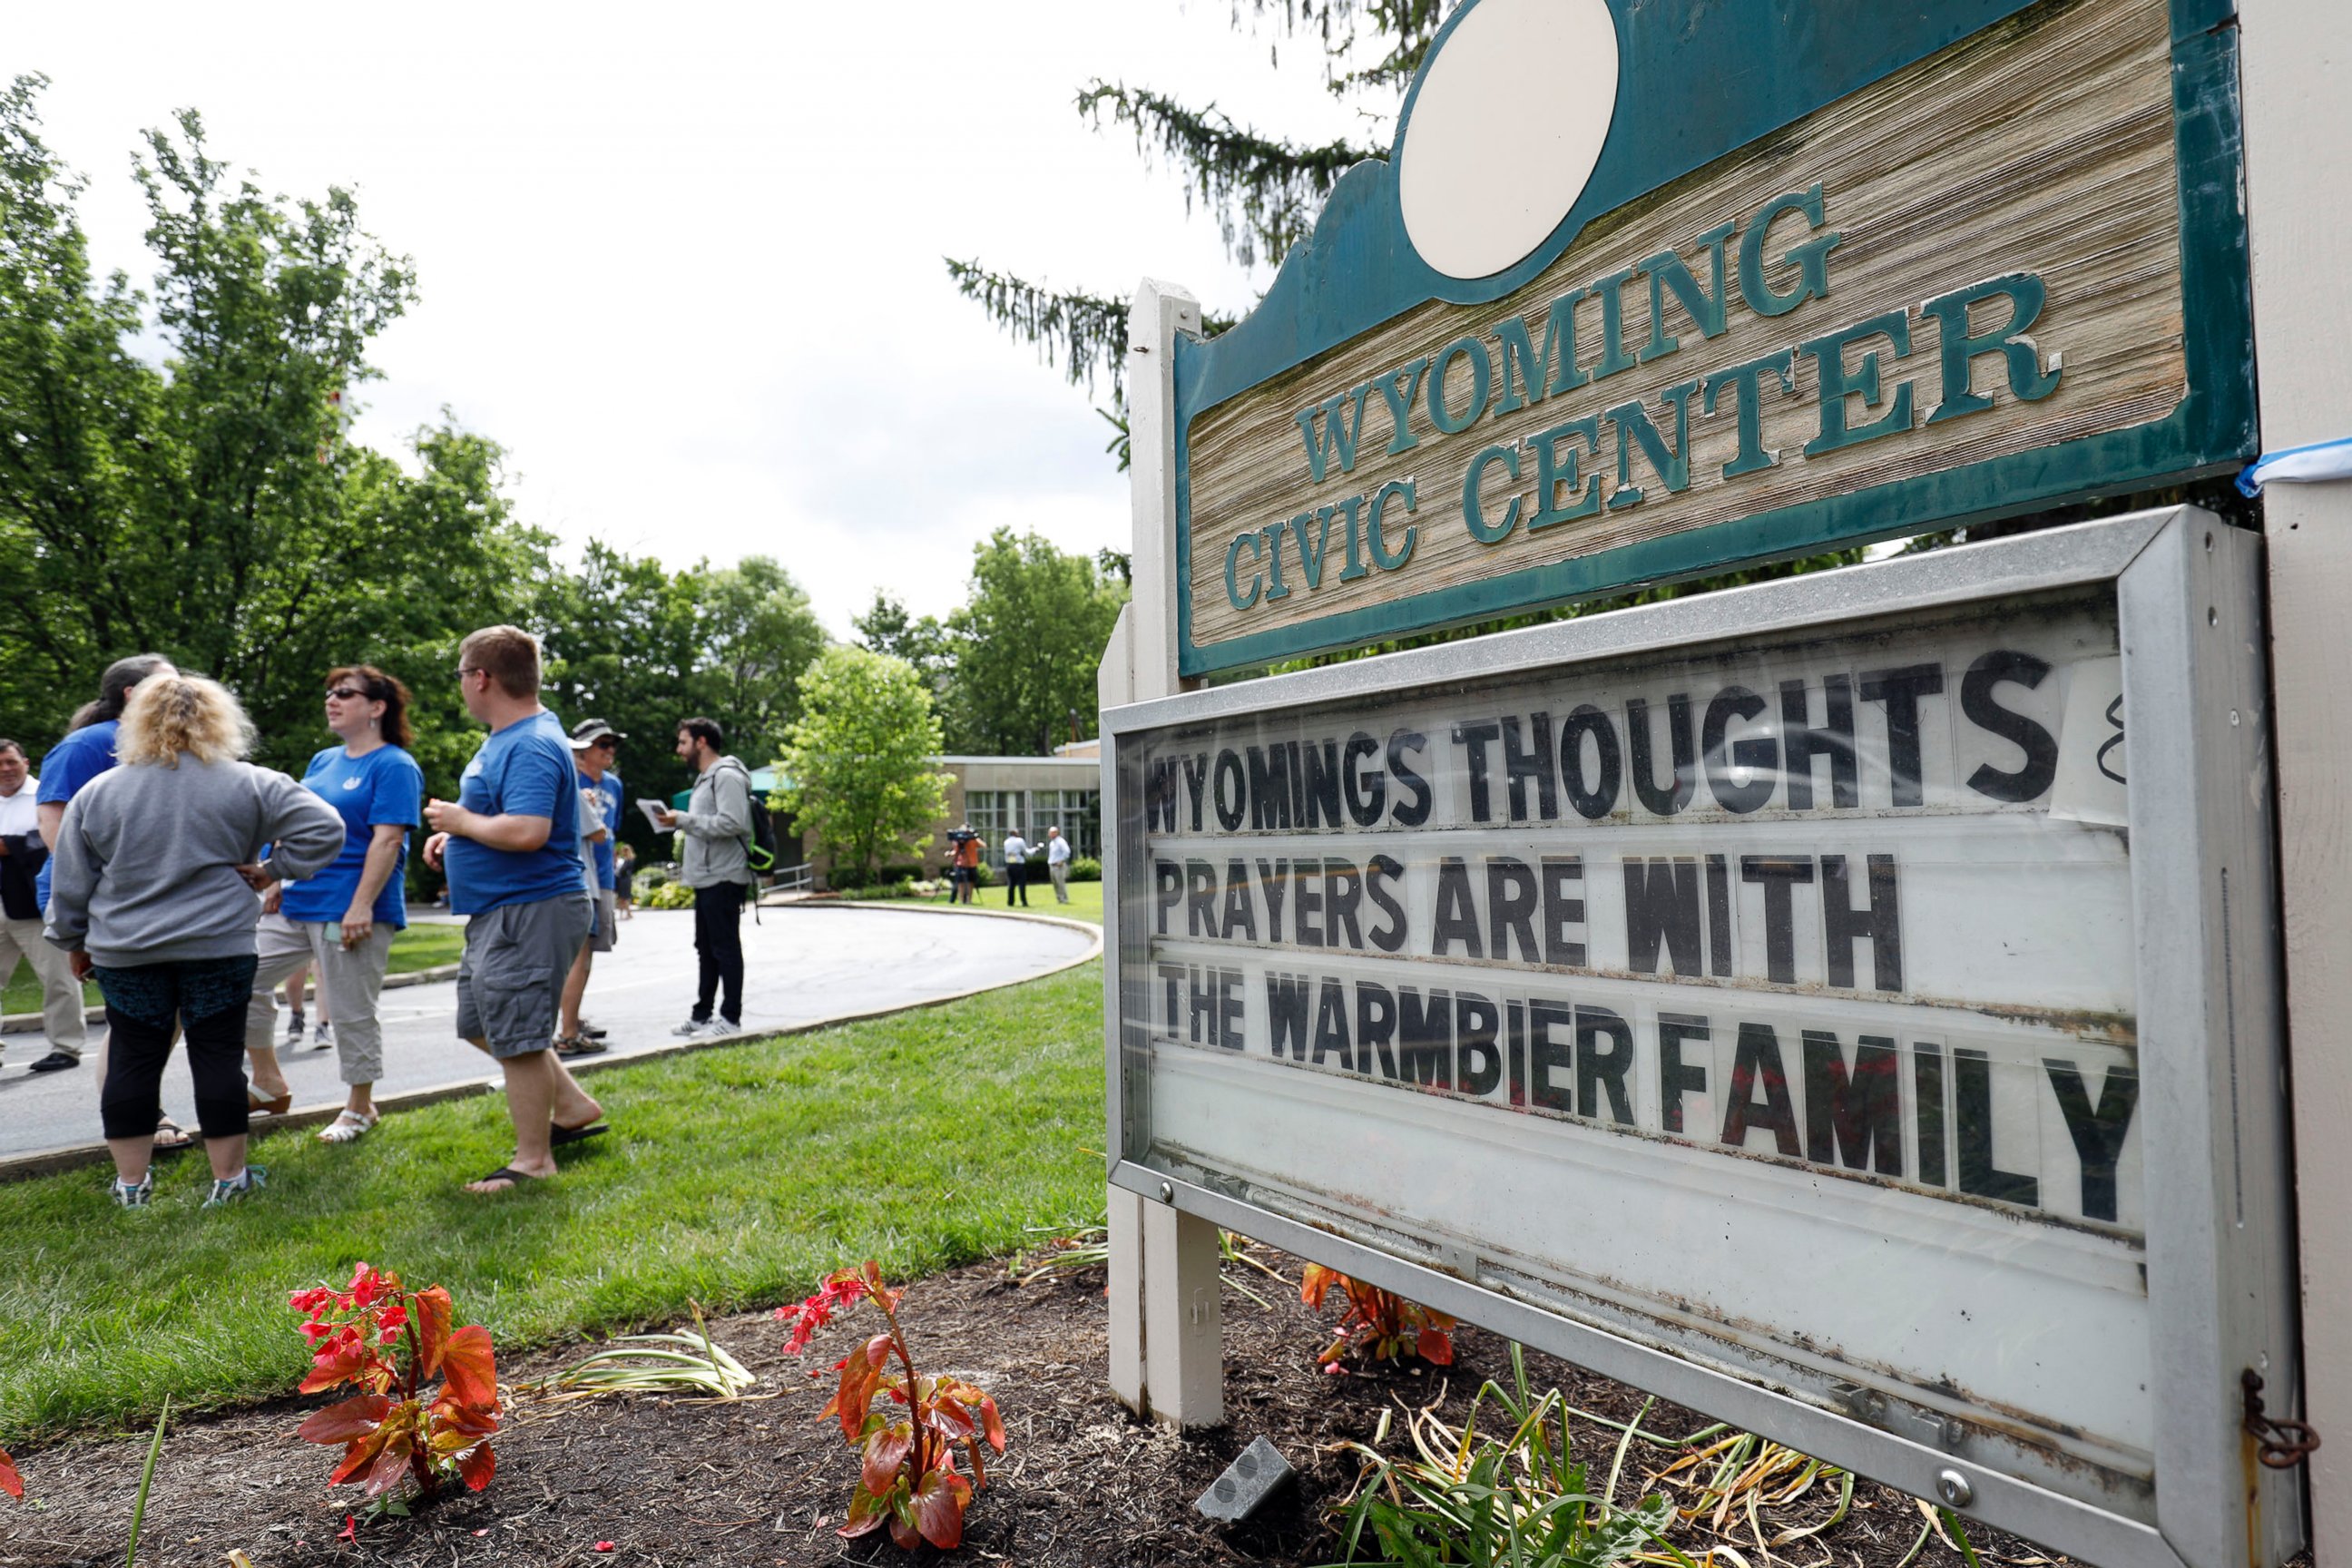 PHOTO: Friends and supporters of Otto Warmbier, the 22-year-old college student who was released from a North Korean prison, gather together to show their support for the Warmbier family June 15, 2017 in Wyoming, Ohio.